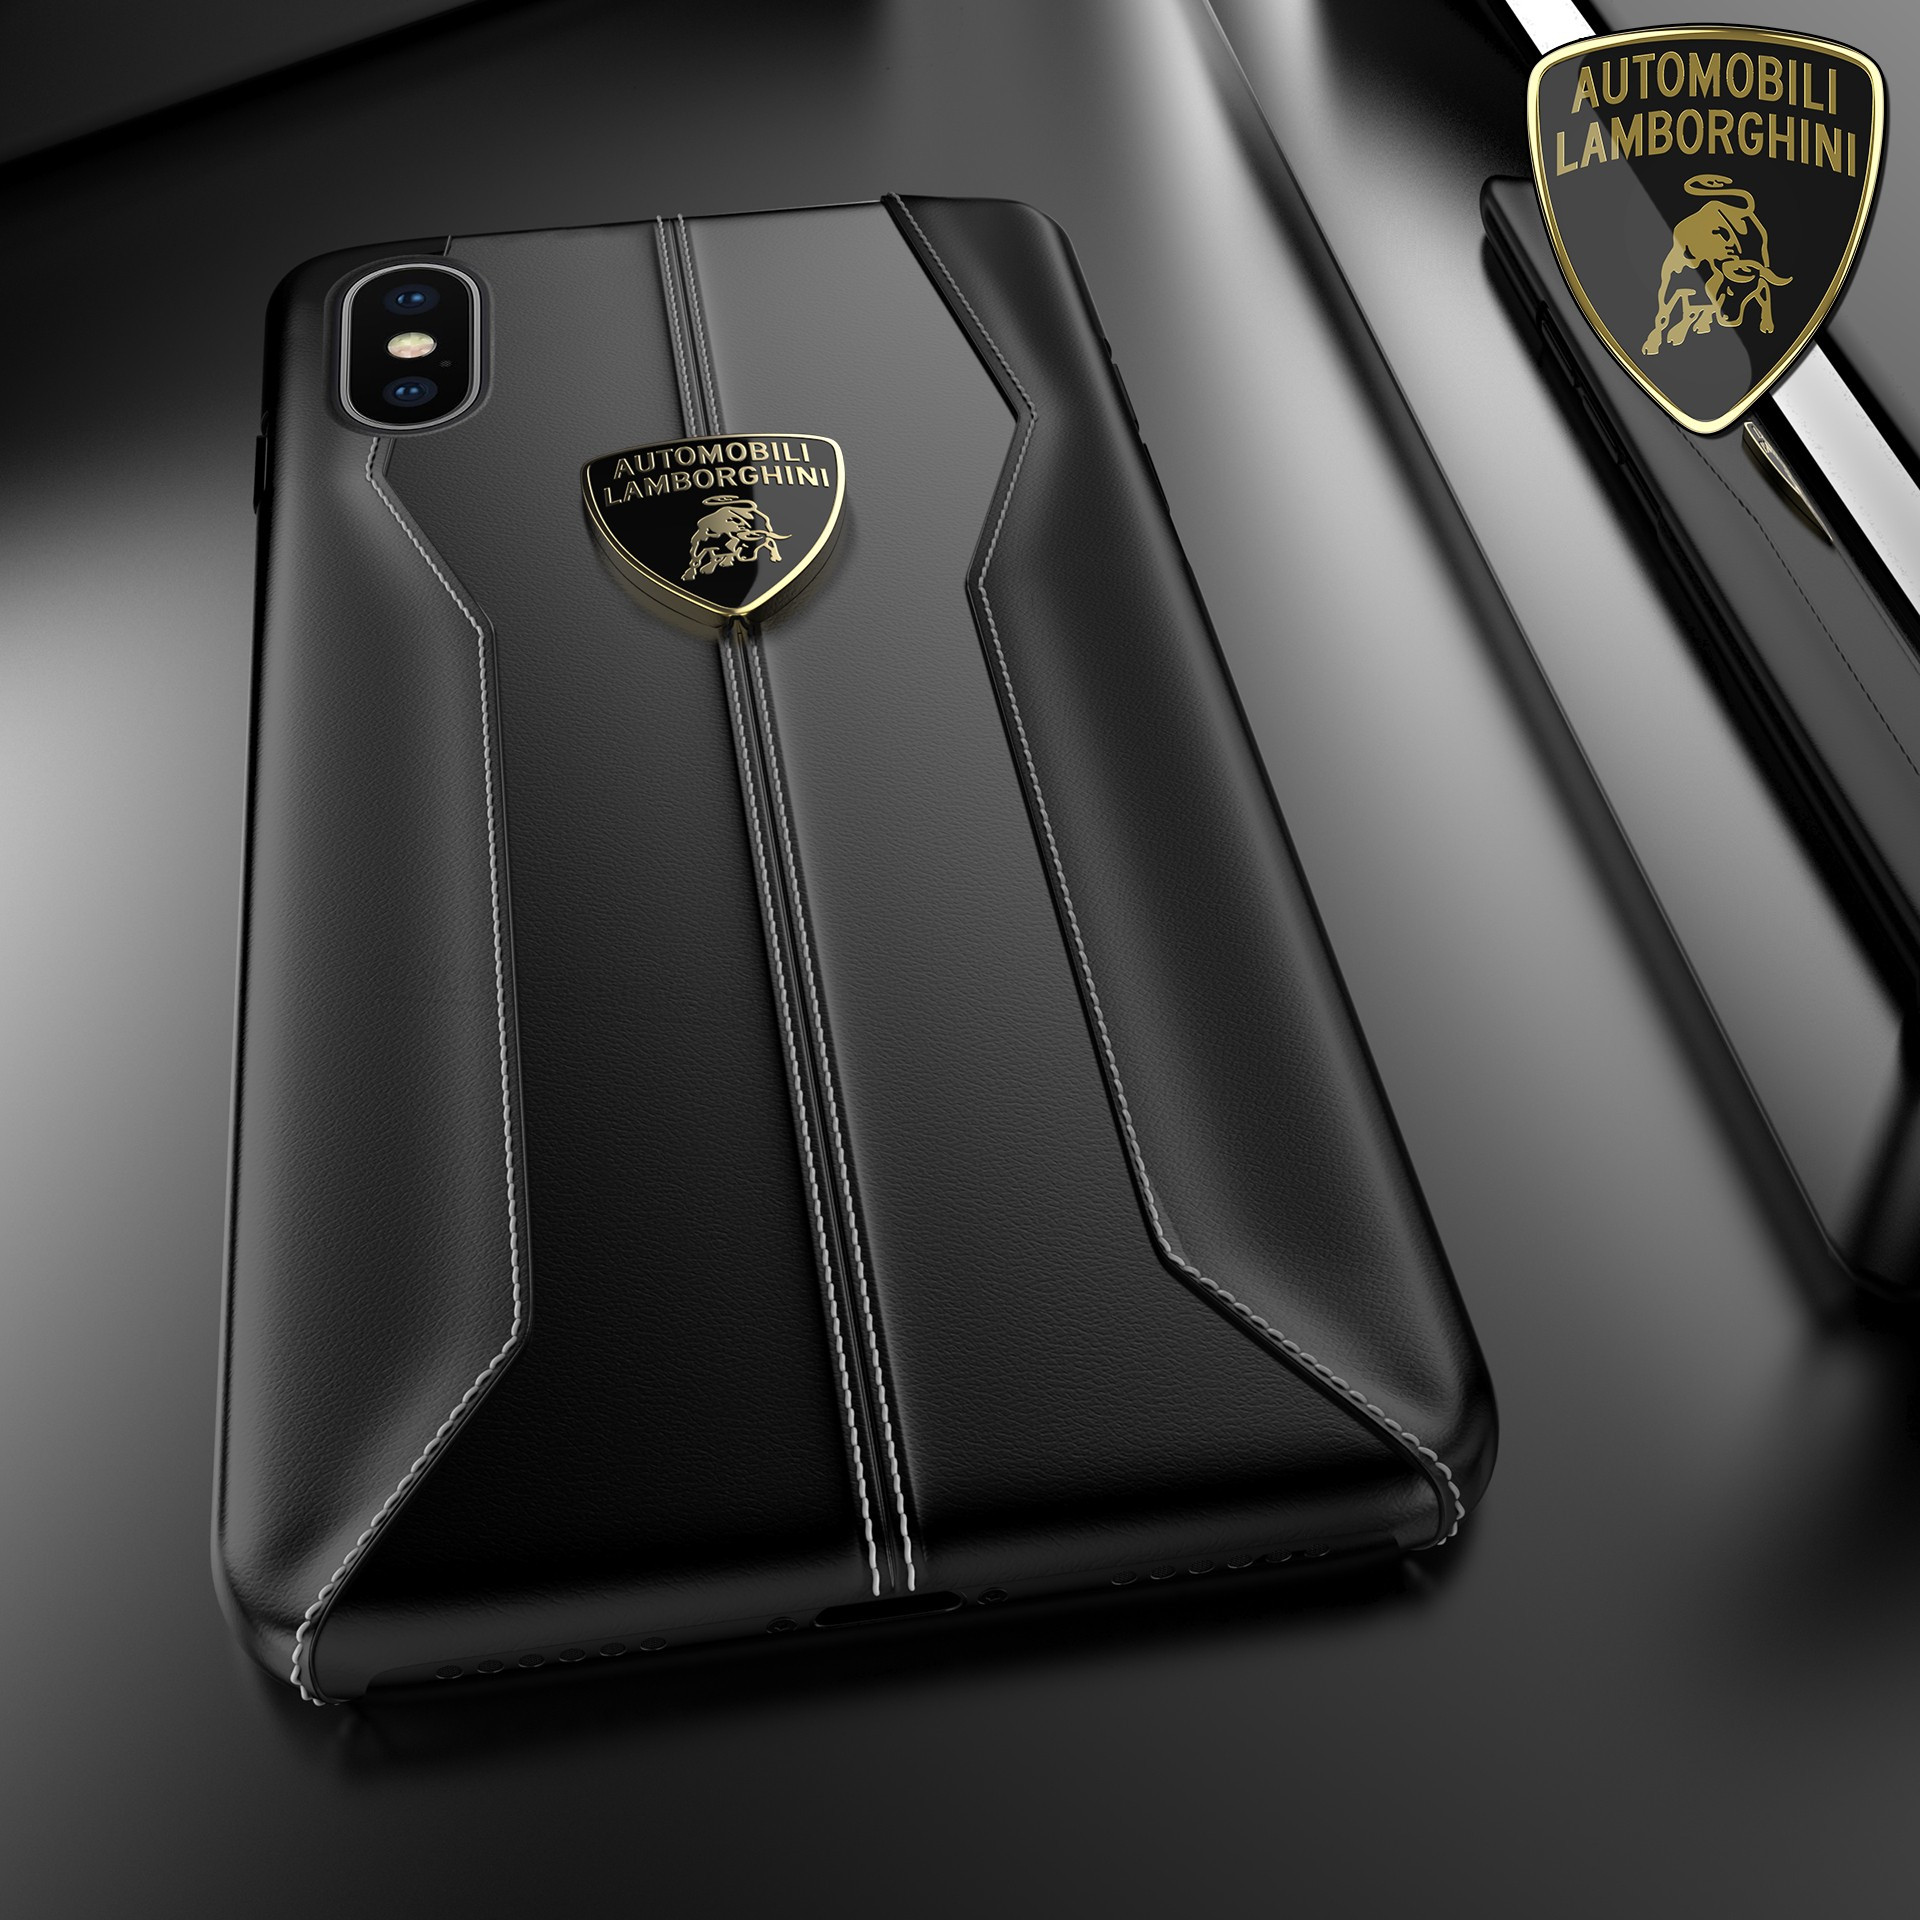 Lamborghini ® Apple iPhone XS Max Official Huracan D1 Series Limited  Edition Case Back Cover - iPhone XS Max - Apple - Mobile / Tablet - Screen  Guards India